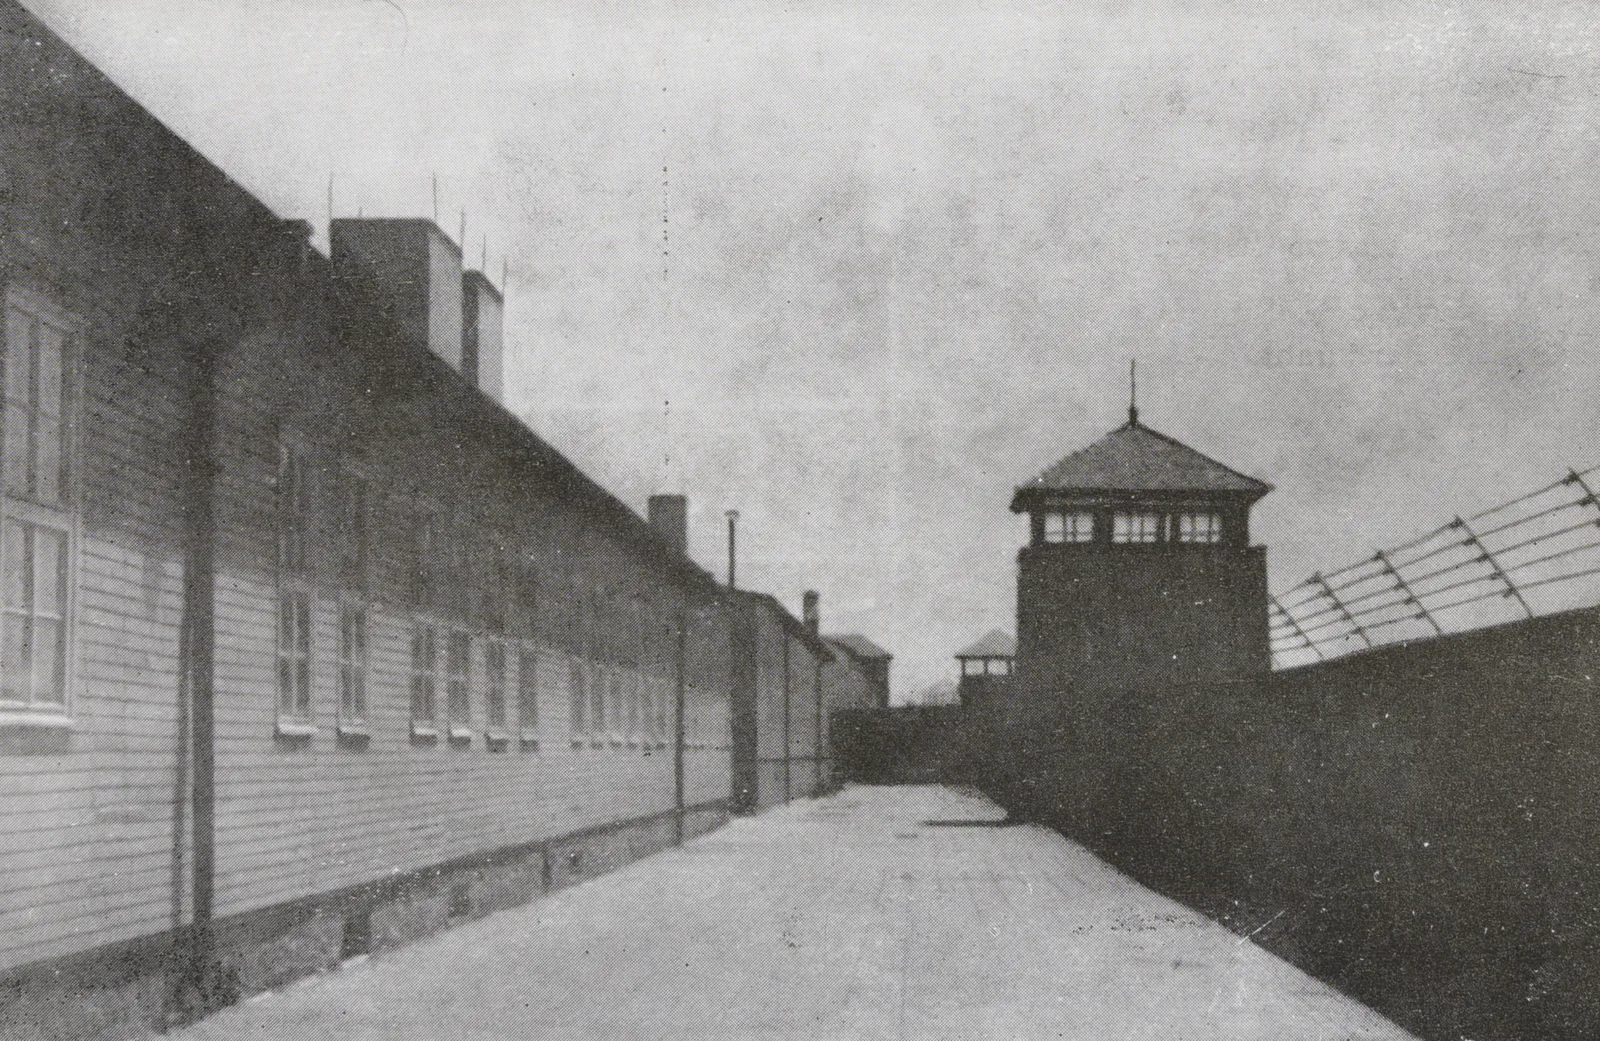 View of the concentration camp: a wall with barbed wire and a watchtower.